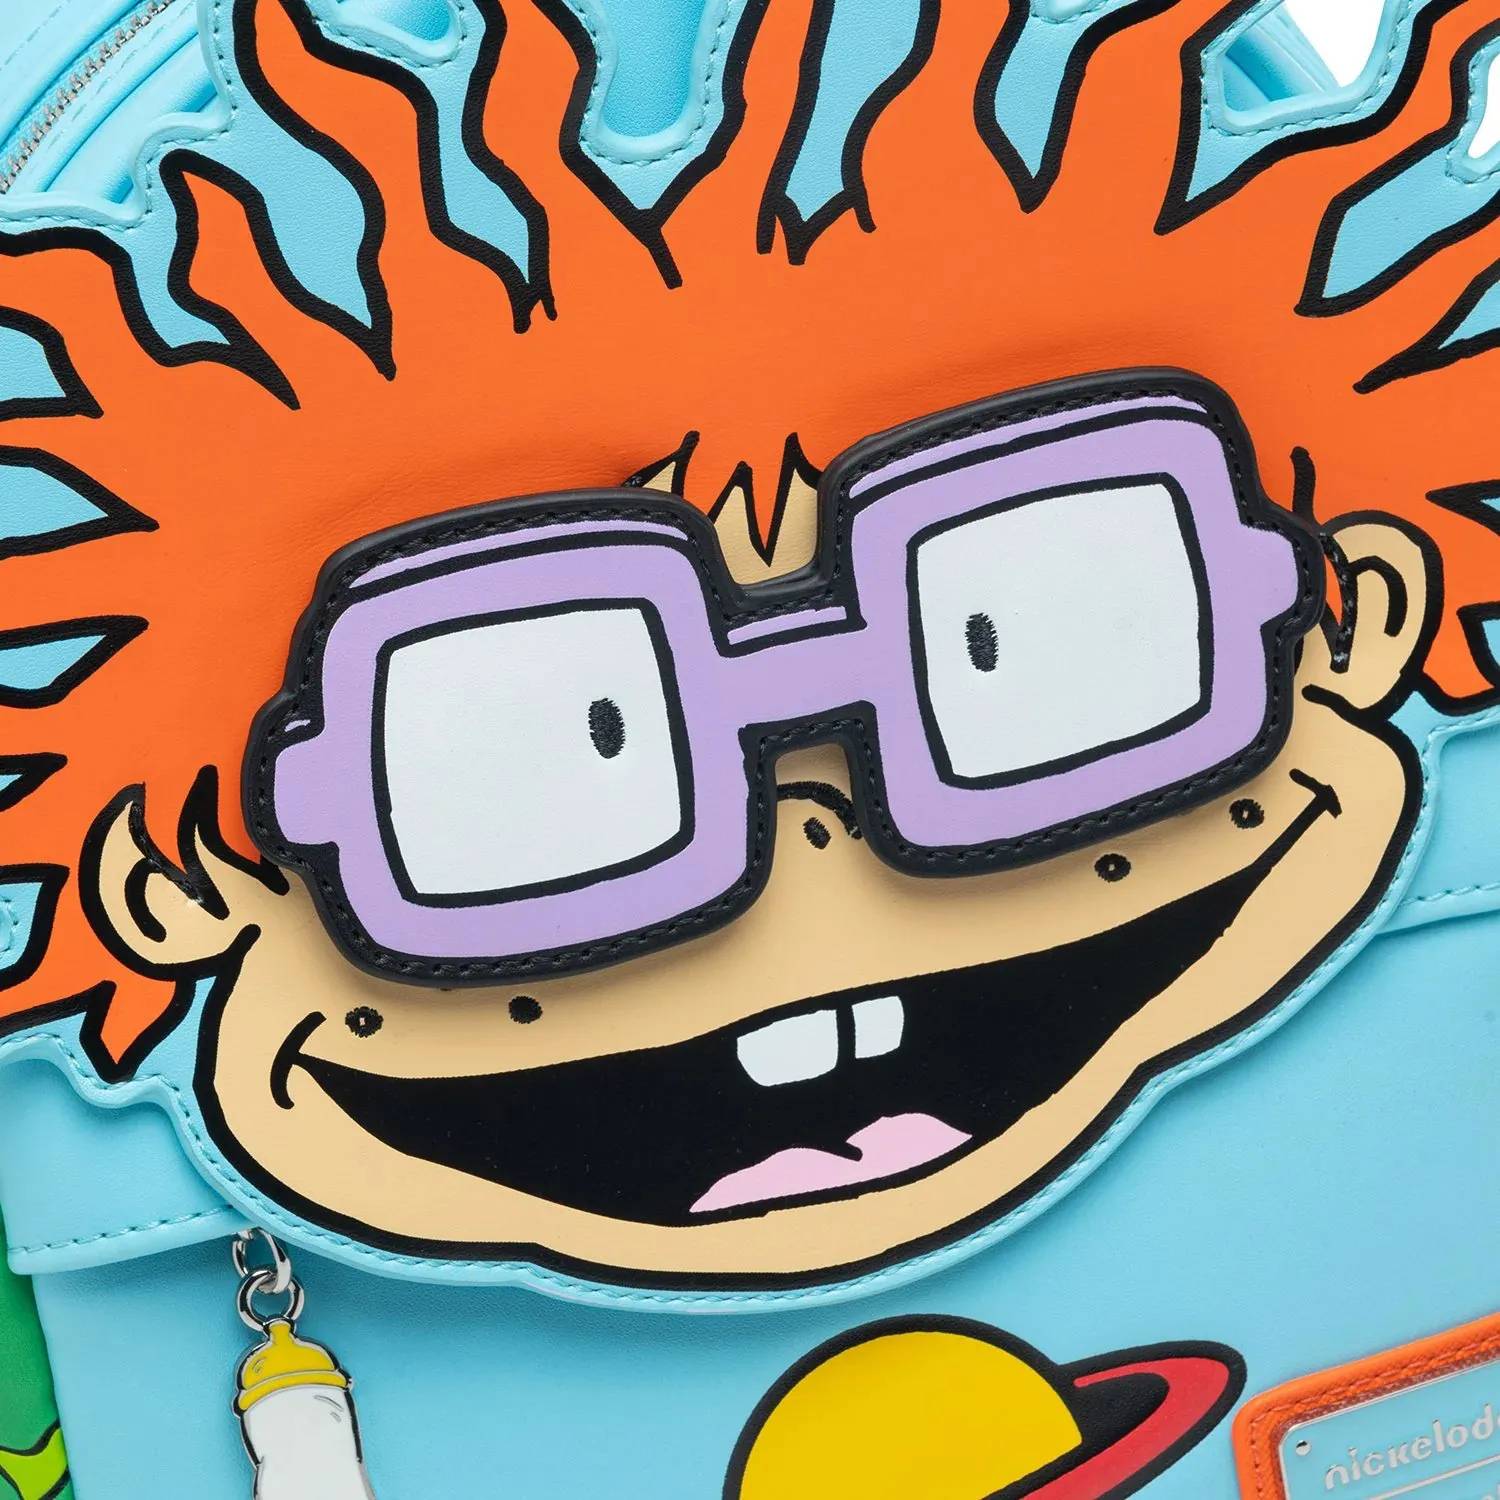 Rugrats Chuckie Cosplay with Removable Glasses